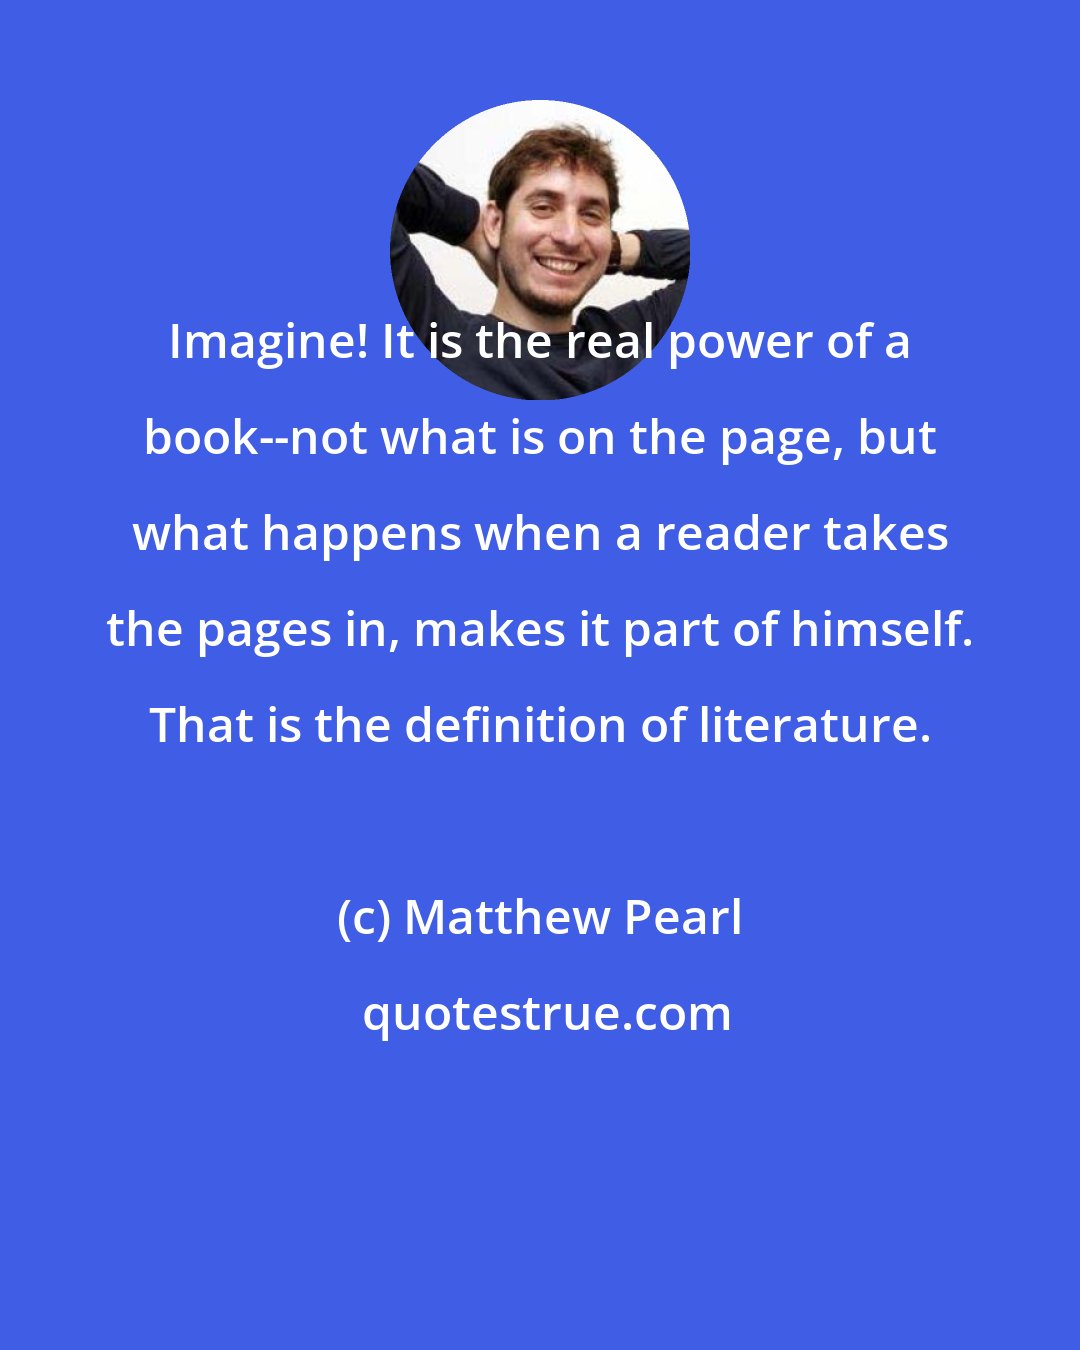 Matthew Pearl: Imagine! It is the real power of a book--not what is on the page, but what happens when a reader takes the pages in, makes it part of himself. That is the definition of literature.